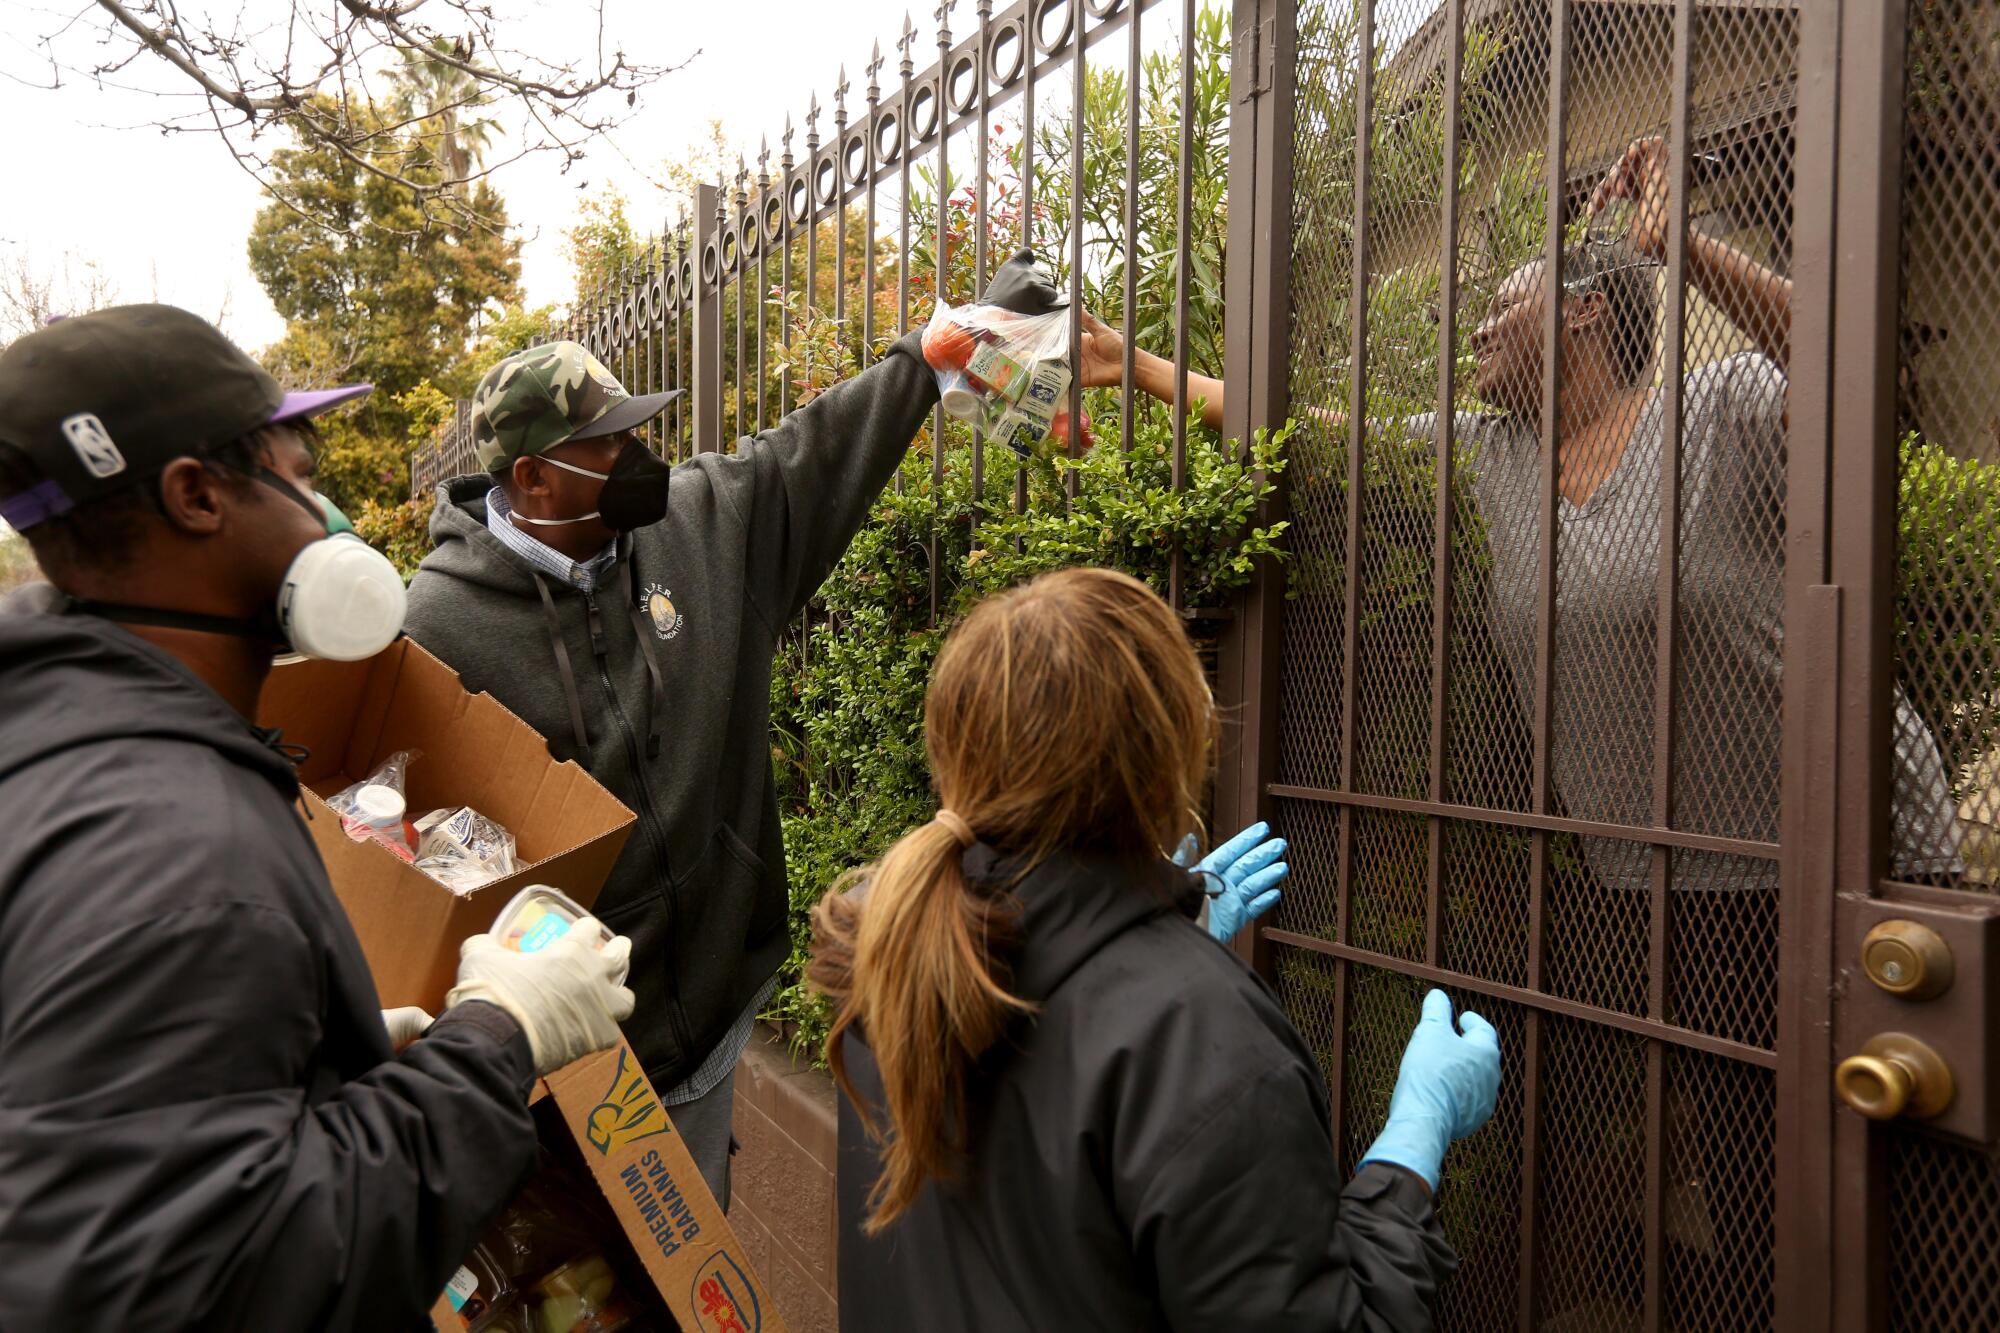 Intervention worker Ansar "Stan" Muhammad, center, delivers food through a fence.